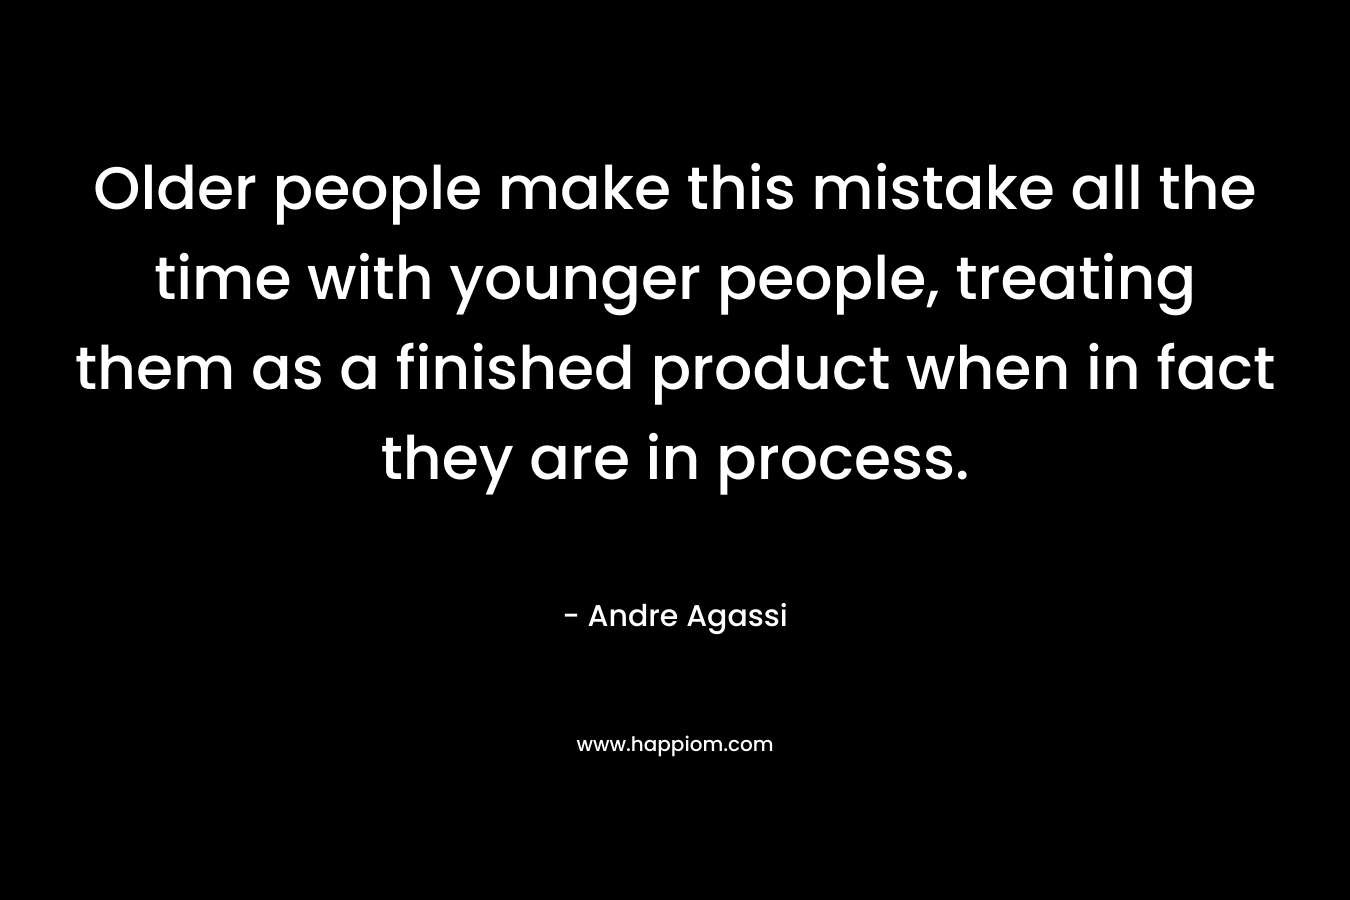 Older people make this mistake all the time with younger people, treating them as a finished product when in fact they are in process. – Andre Agassi